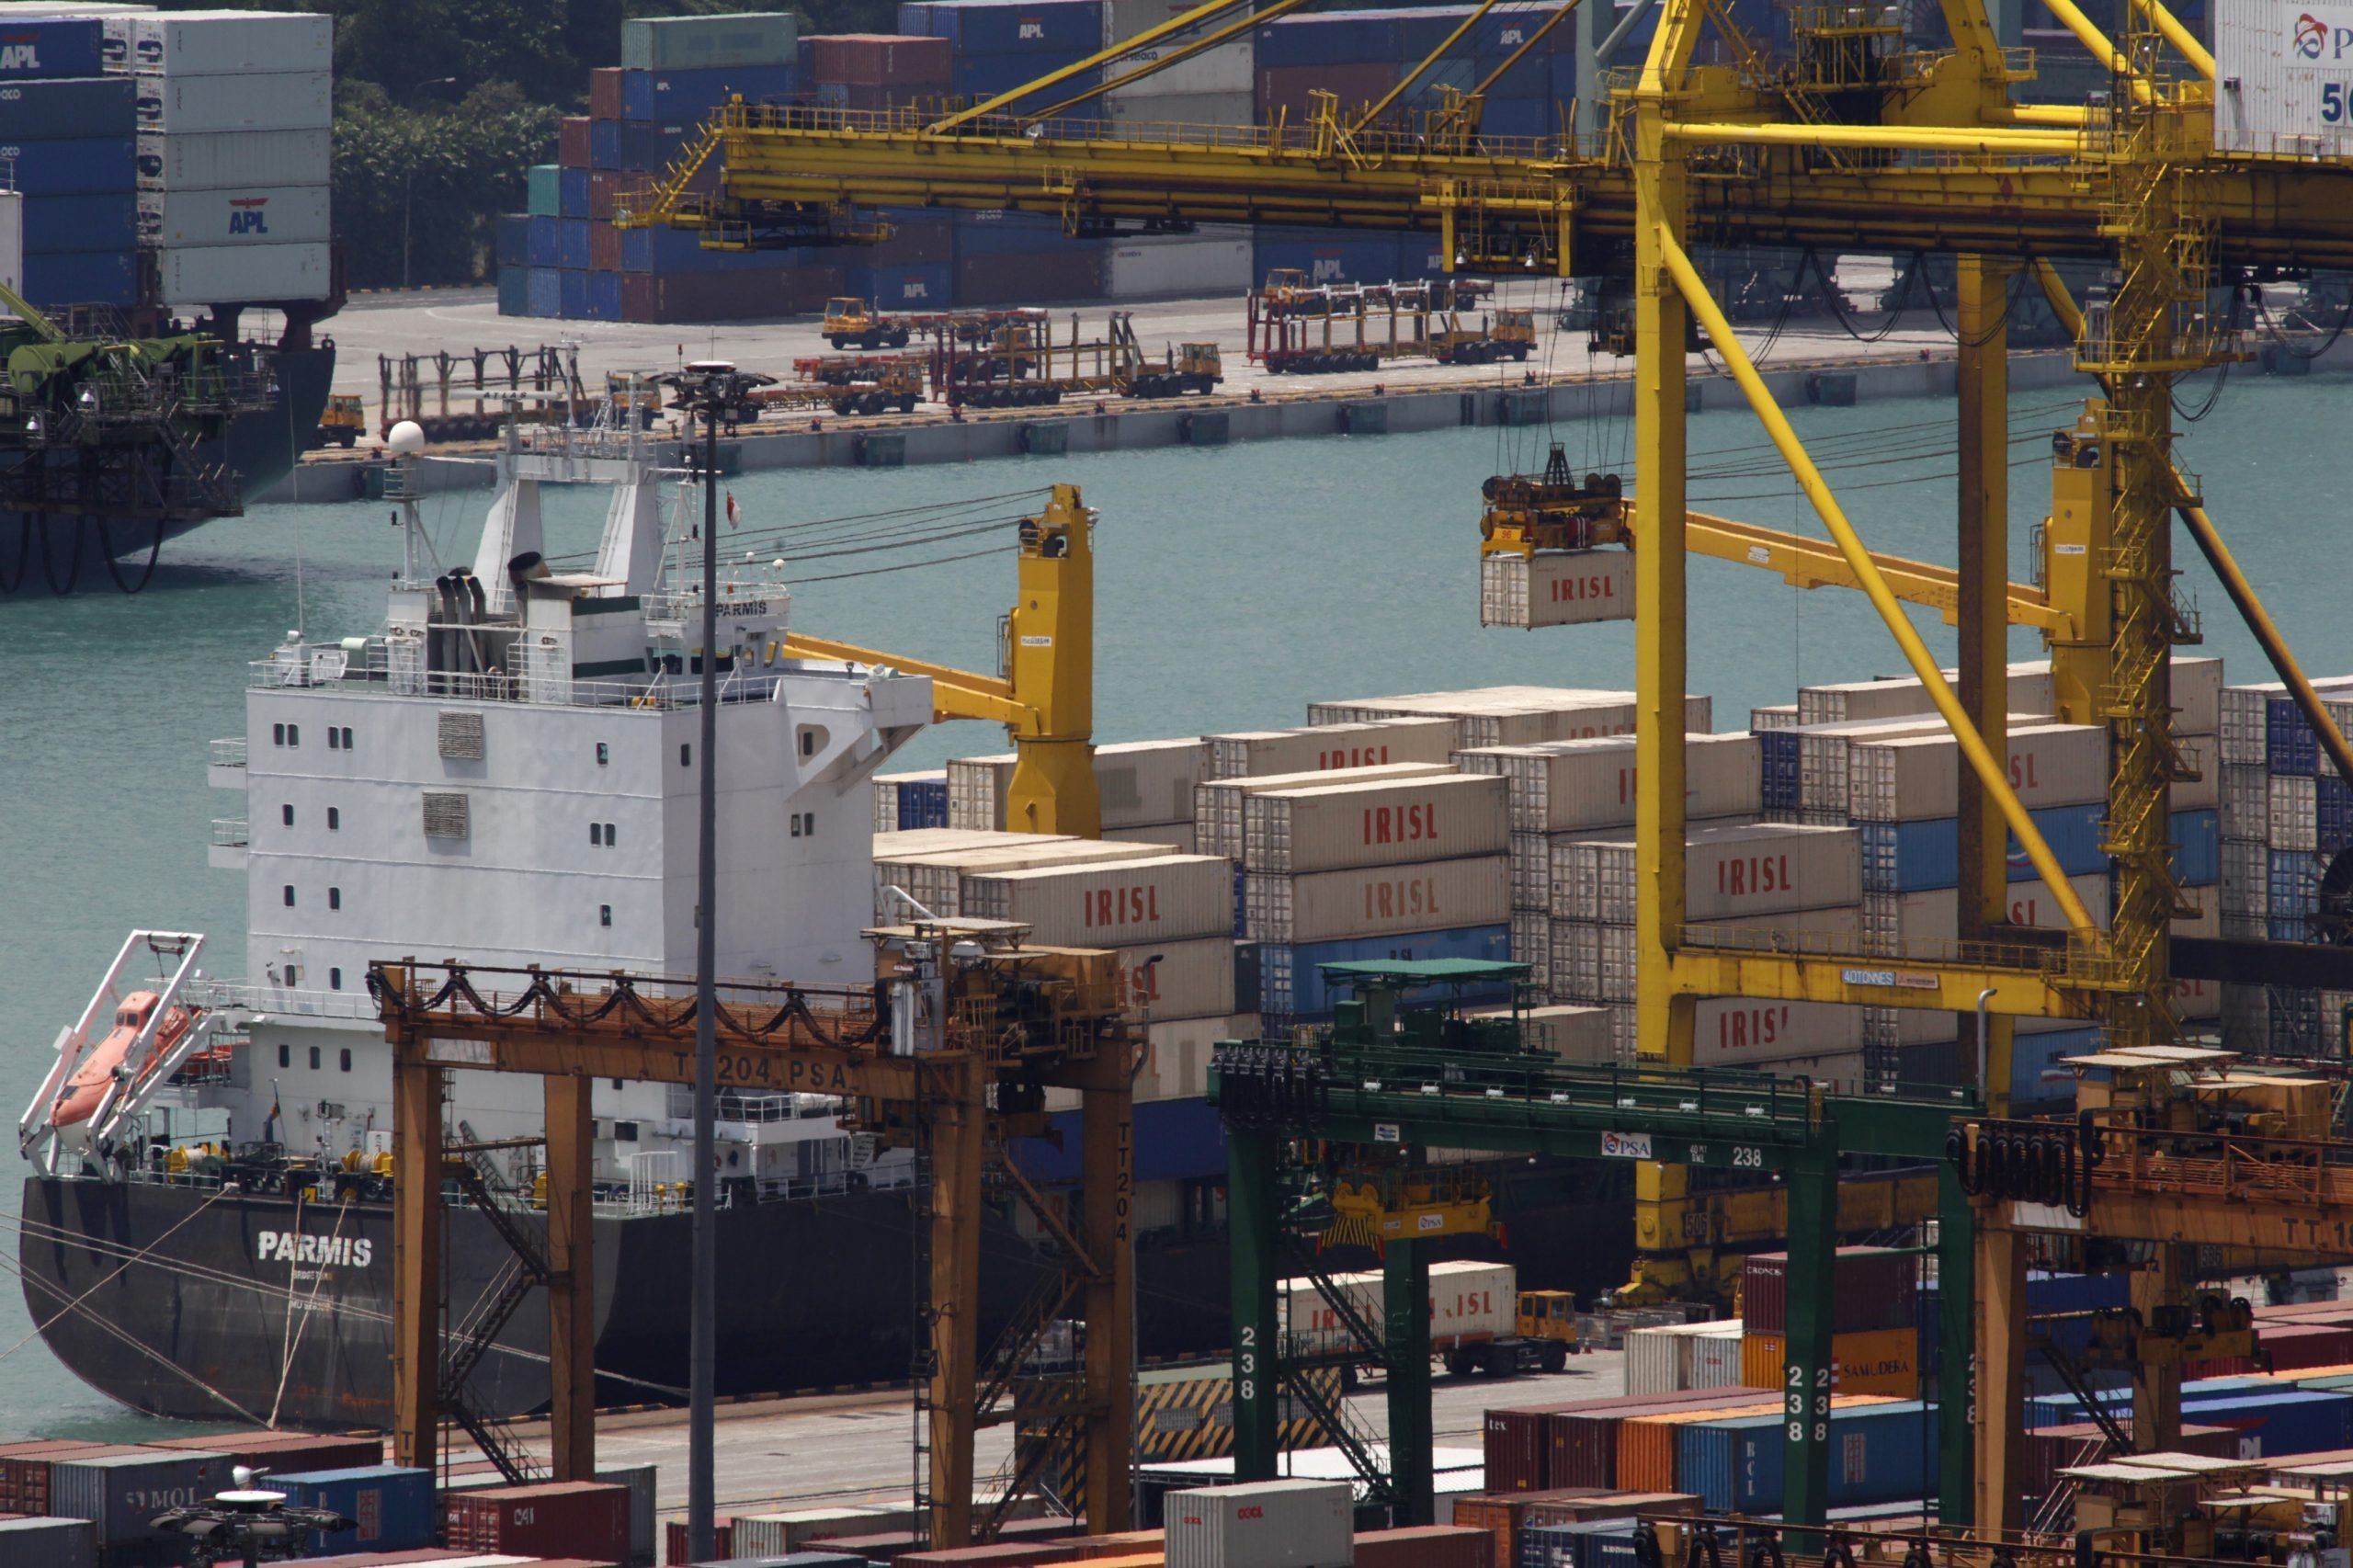 FILE PHOTO: The Parmis is loaded at a dock in Singapore. The IRISL ships and containers are key parts in an international cat-and-mouse game: Iran's attempt to evade the trade sanctions tightening around it. Washington and European capitals want to stop or slow Iran's nuclear programme. They believe that IRISL, which moves nearly a third of Iran's exports and imports and is central to the country's trade, plays a critical role in evading sanctions against shipping controlled weapons, missiles and nuclear technology to and from Iran.   